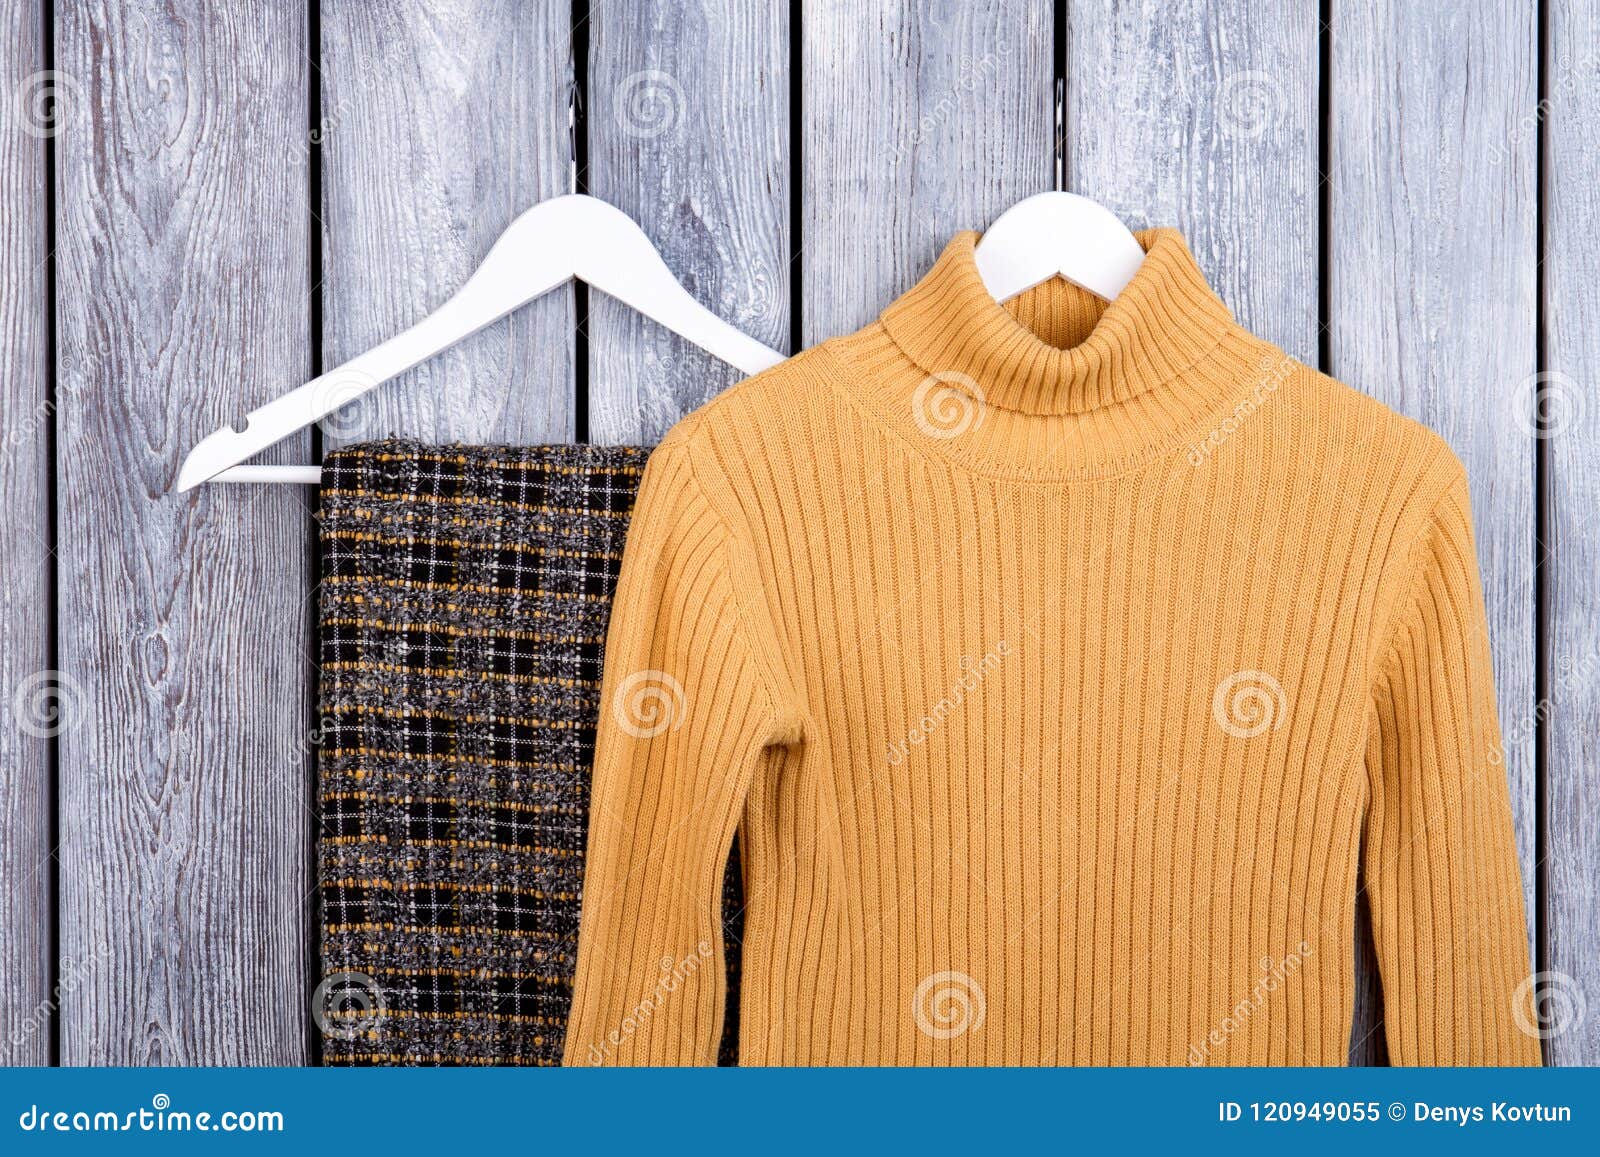 Winter Female Garment On Hangers. Stock Image - Image of clothes ...